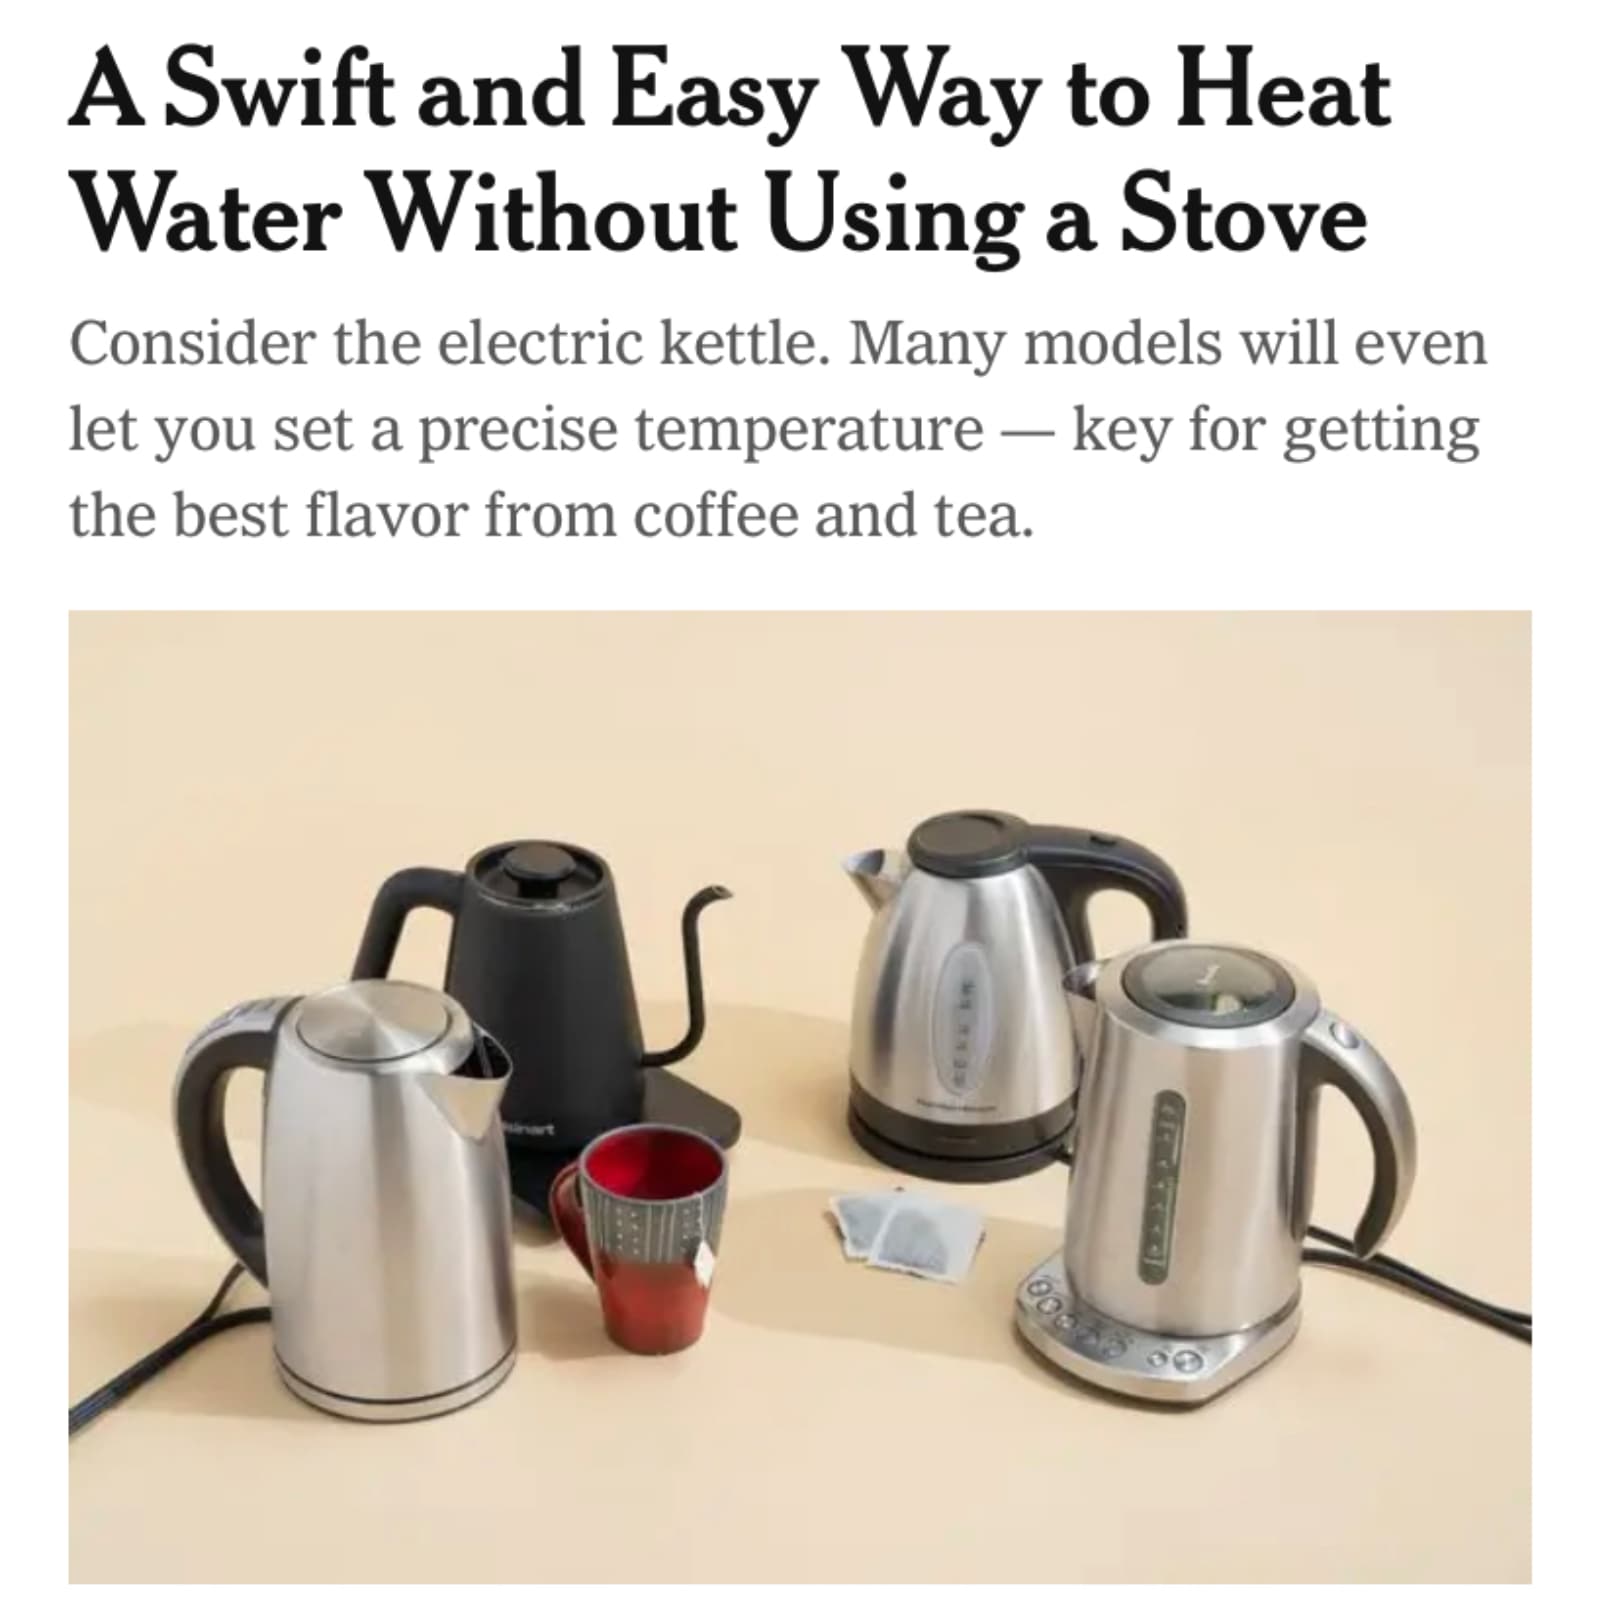 Shopping for Kettles - The New York Times